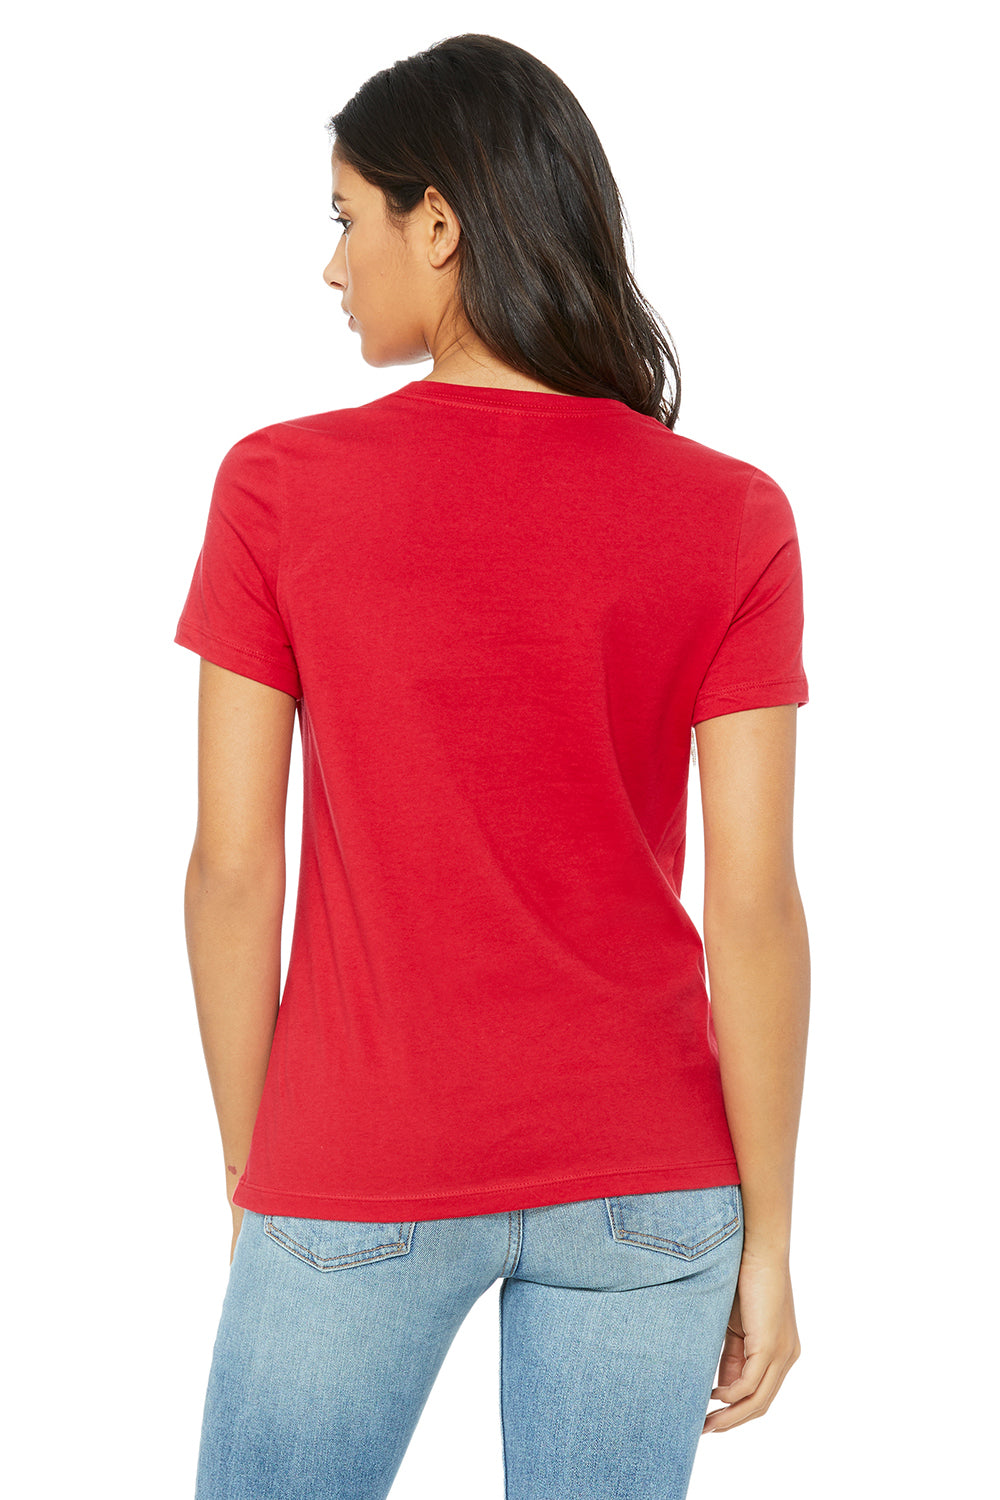 Bella + Canvas BC6400/B6400/6400 Womens Relaxed Jersey Short Sleeve Crewneck T-Shirt Red Model Back